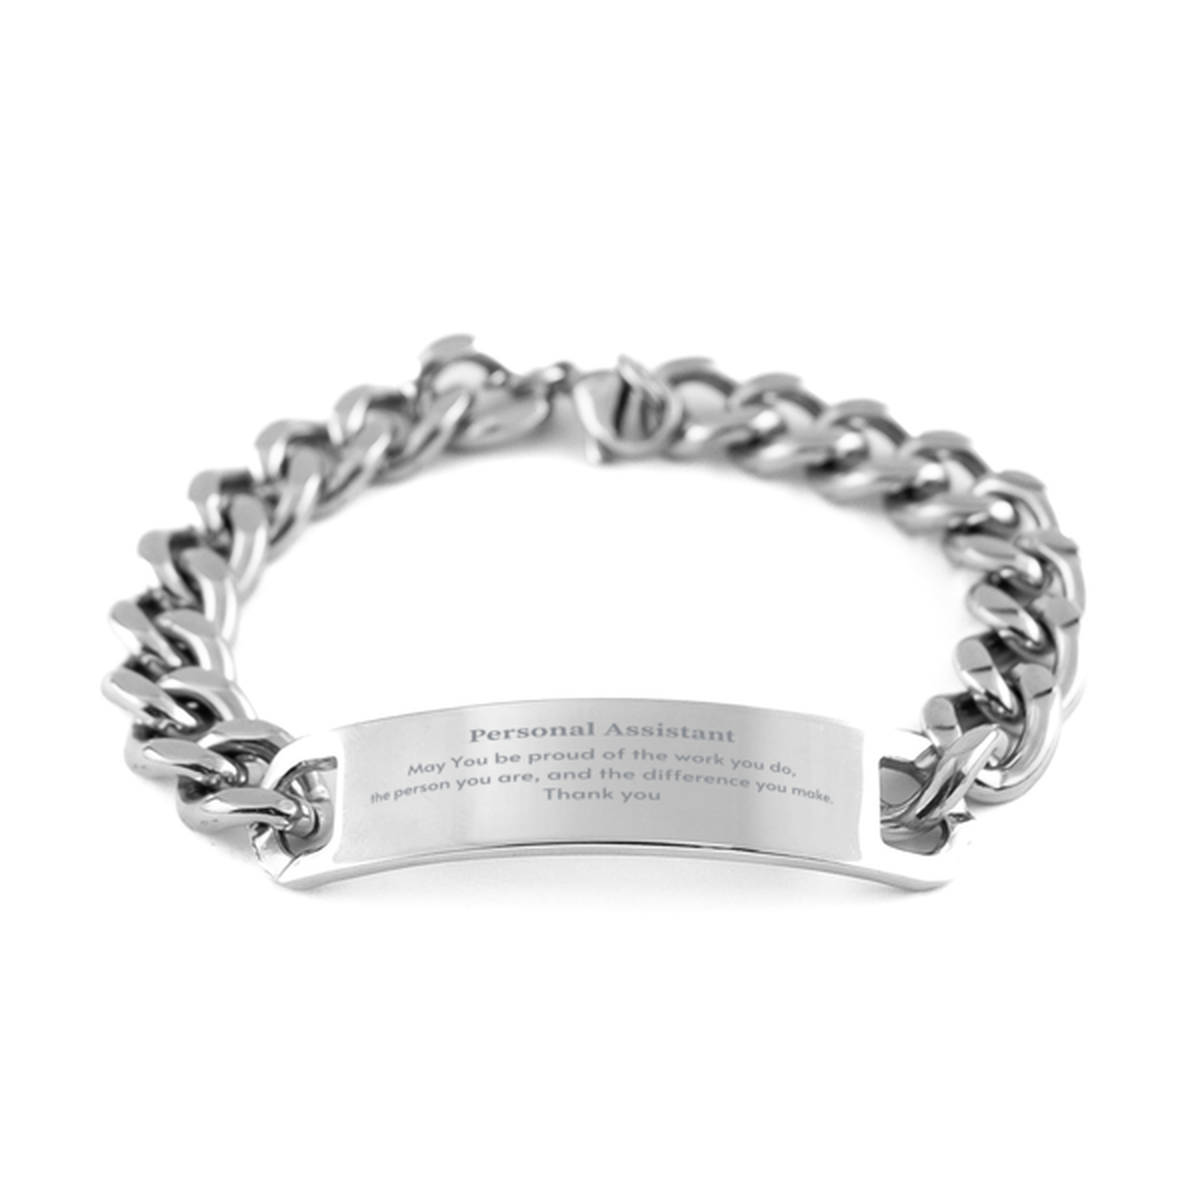 Heartwarming Cuban Chain Stainless Steel Bracelet Retirement Coworkers Gifts for Personal Assistant, Personal Assistant May You be proud of the work you do, the person you are Gifts for Boss Men Women Friends